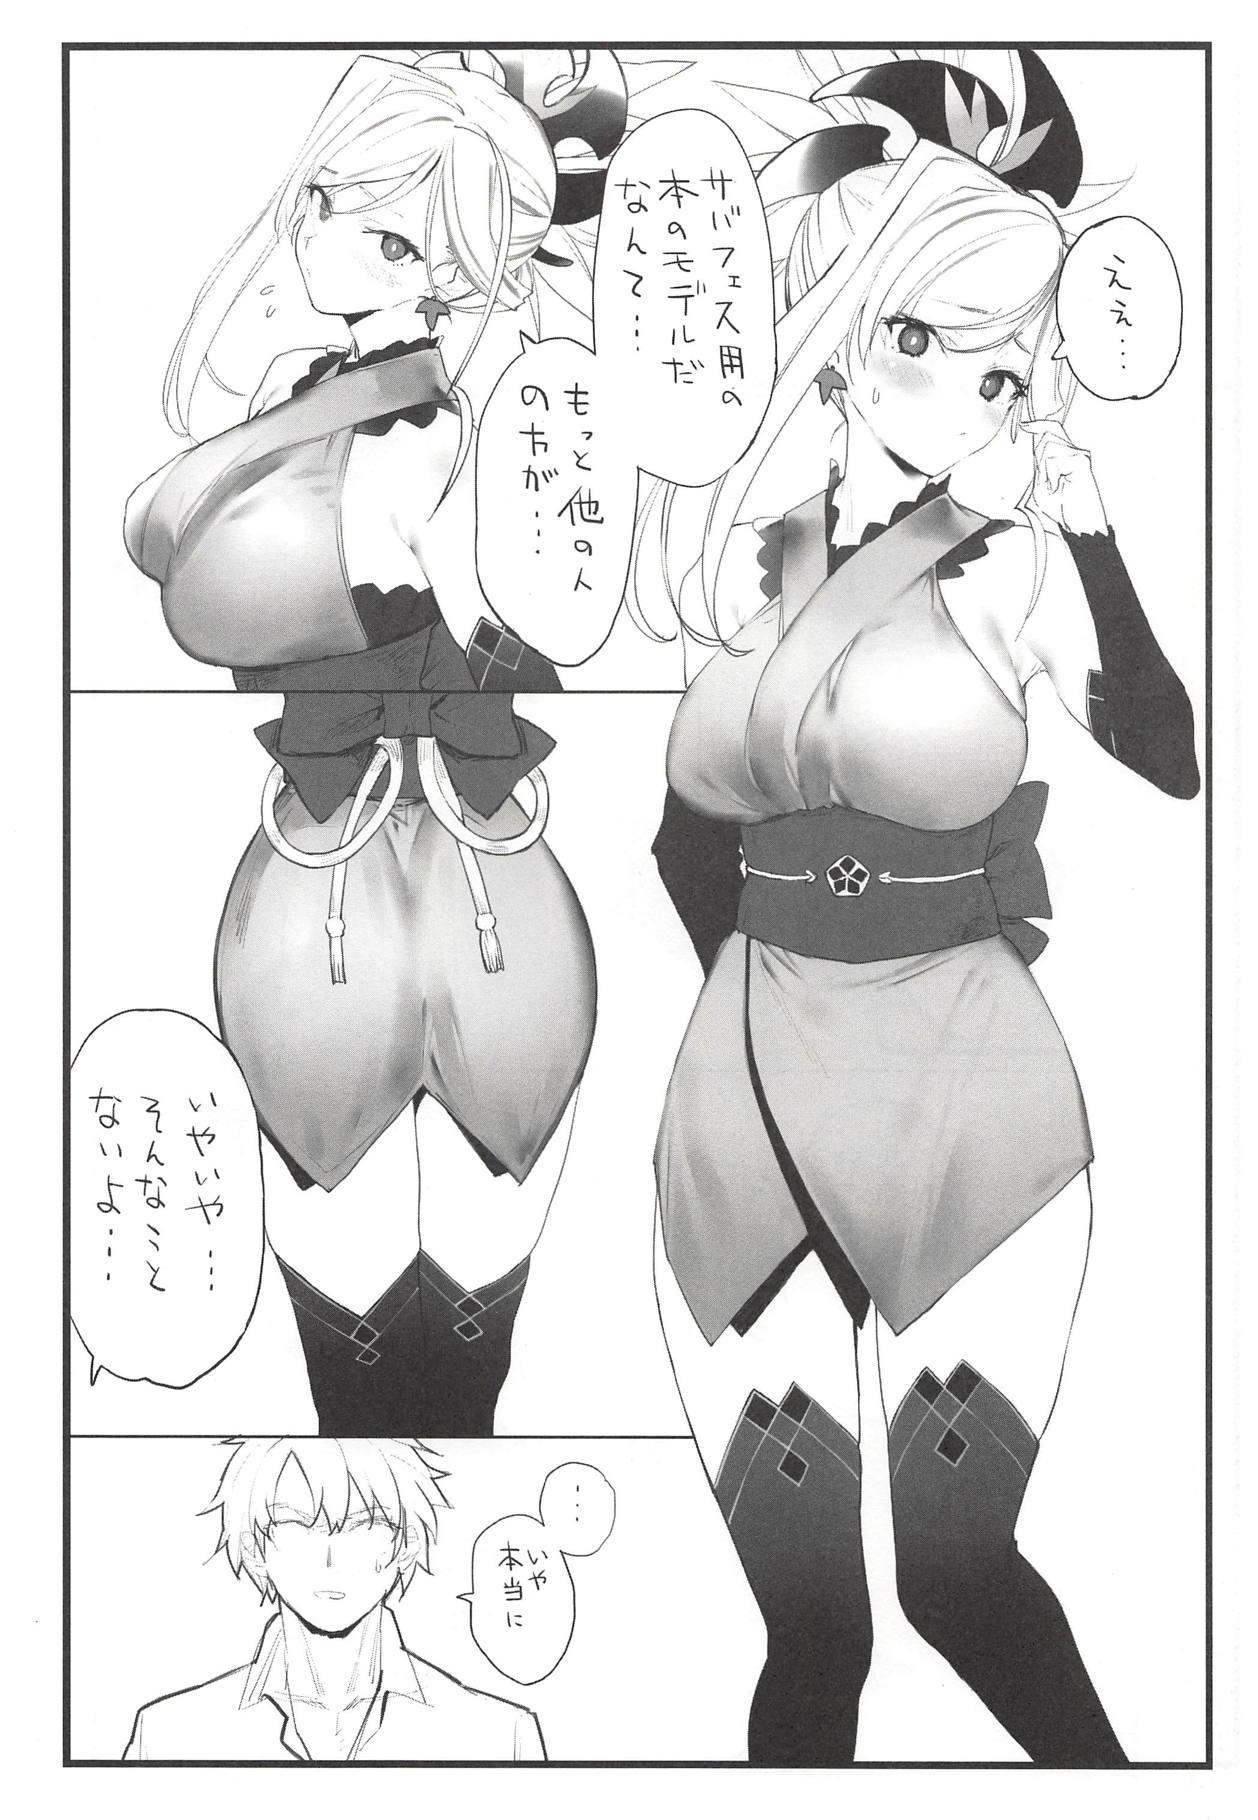 Abuse Musashi-chan no Hon - Fate grand order Punished - Page 3